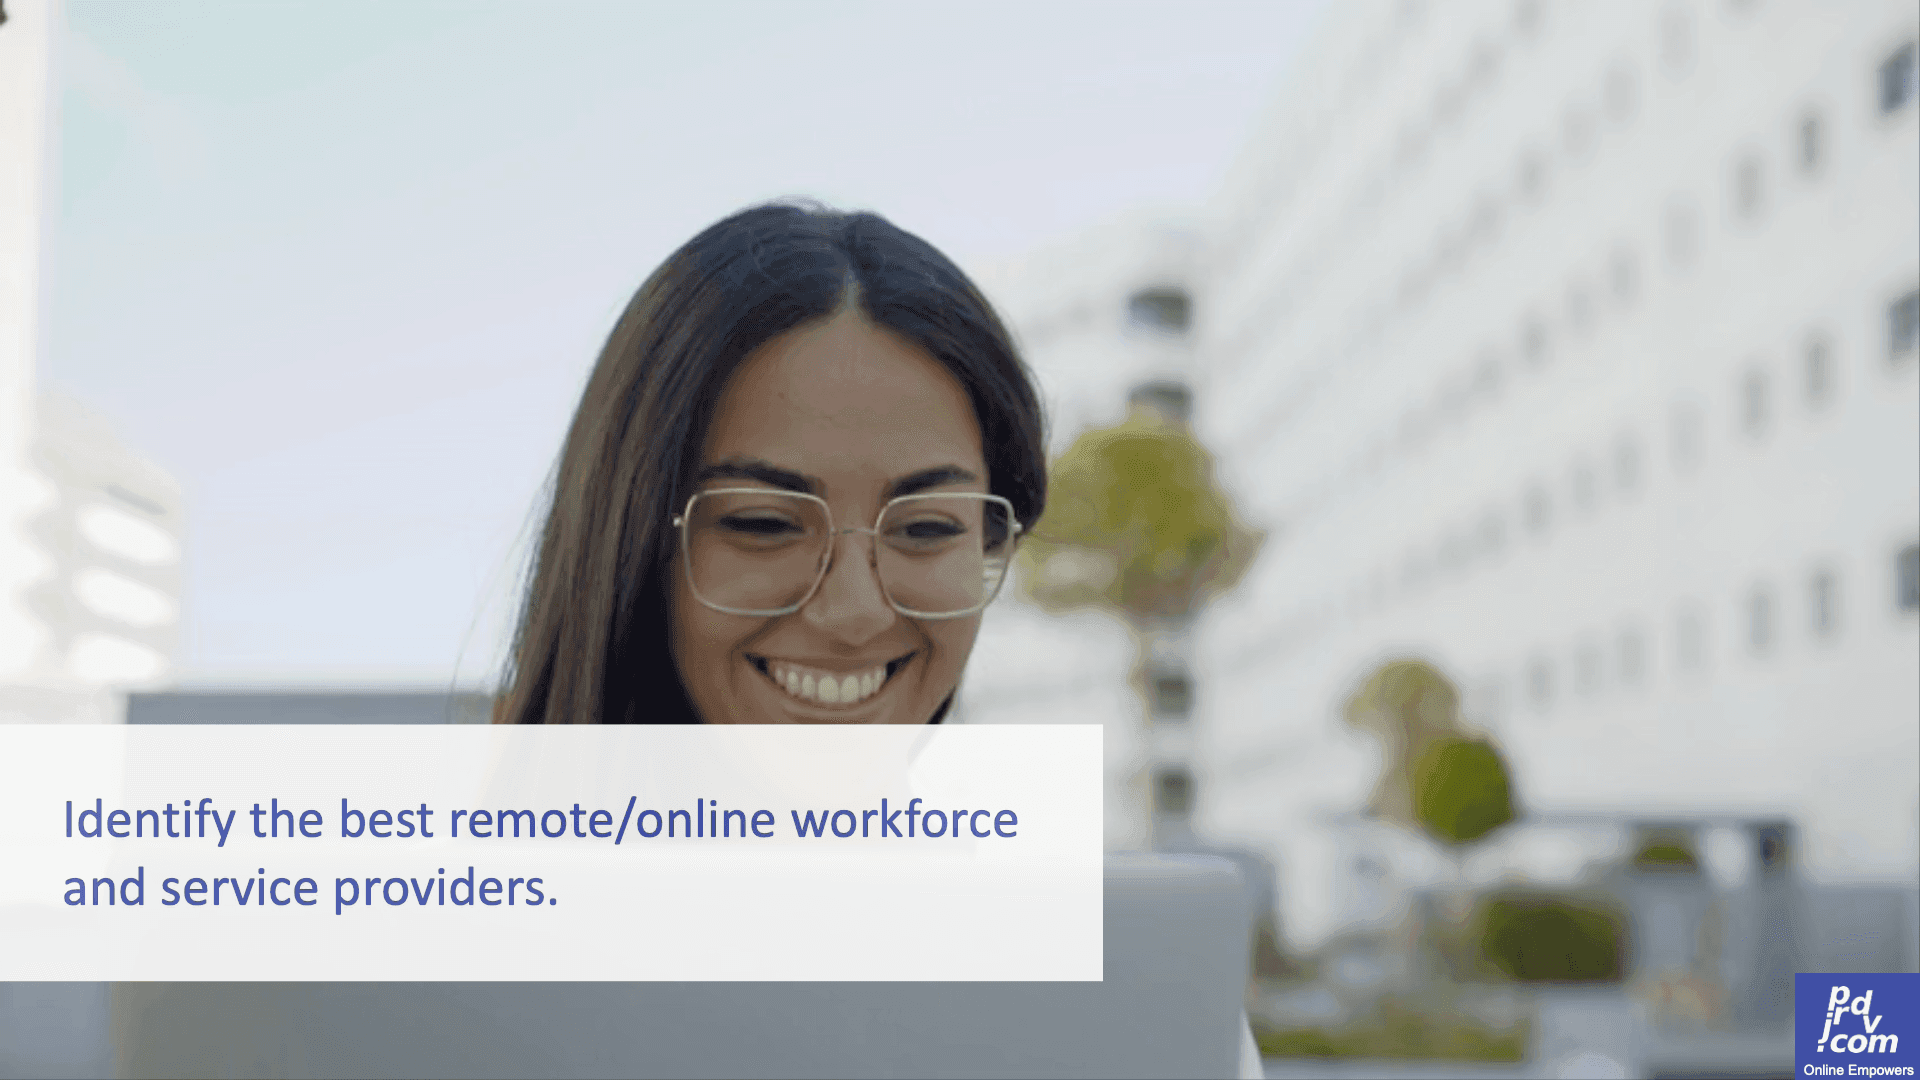 Identify the best remote/online workforce and service providers